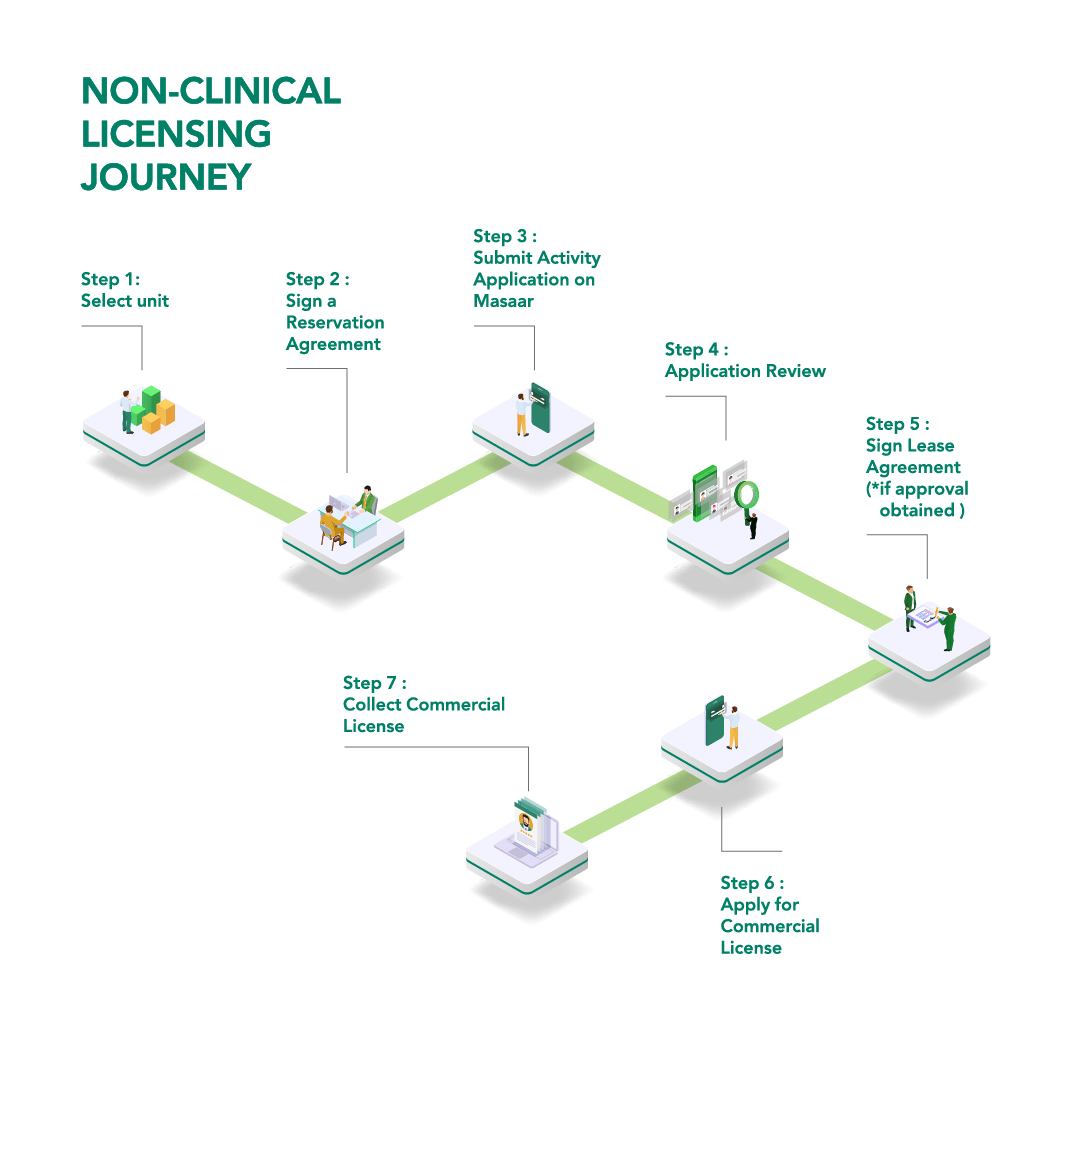 Non-Clinical licensing journey